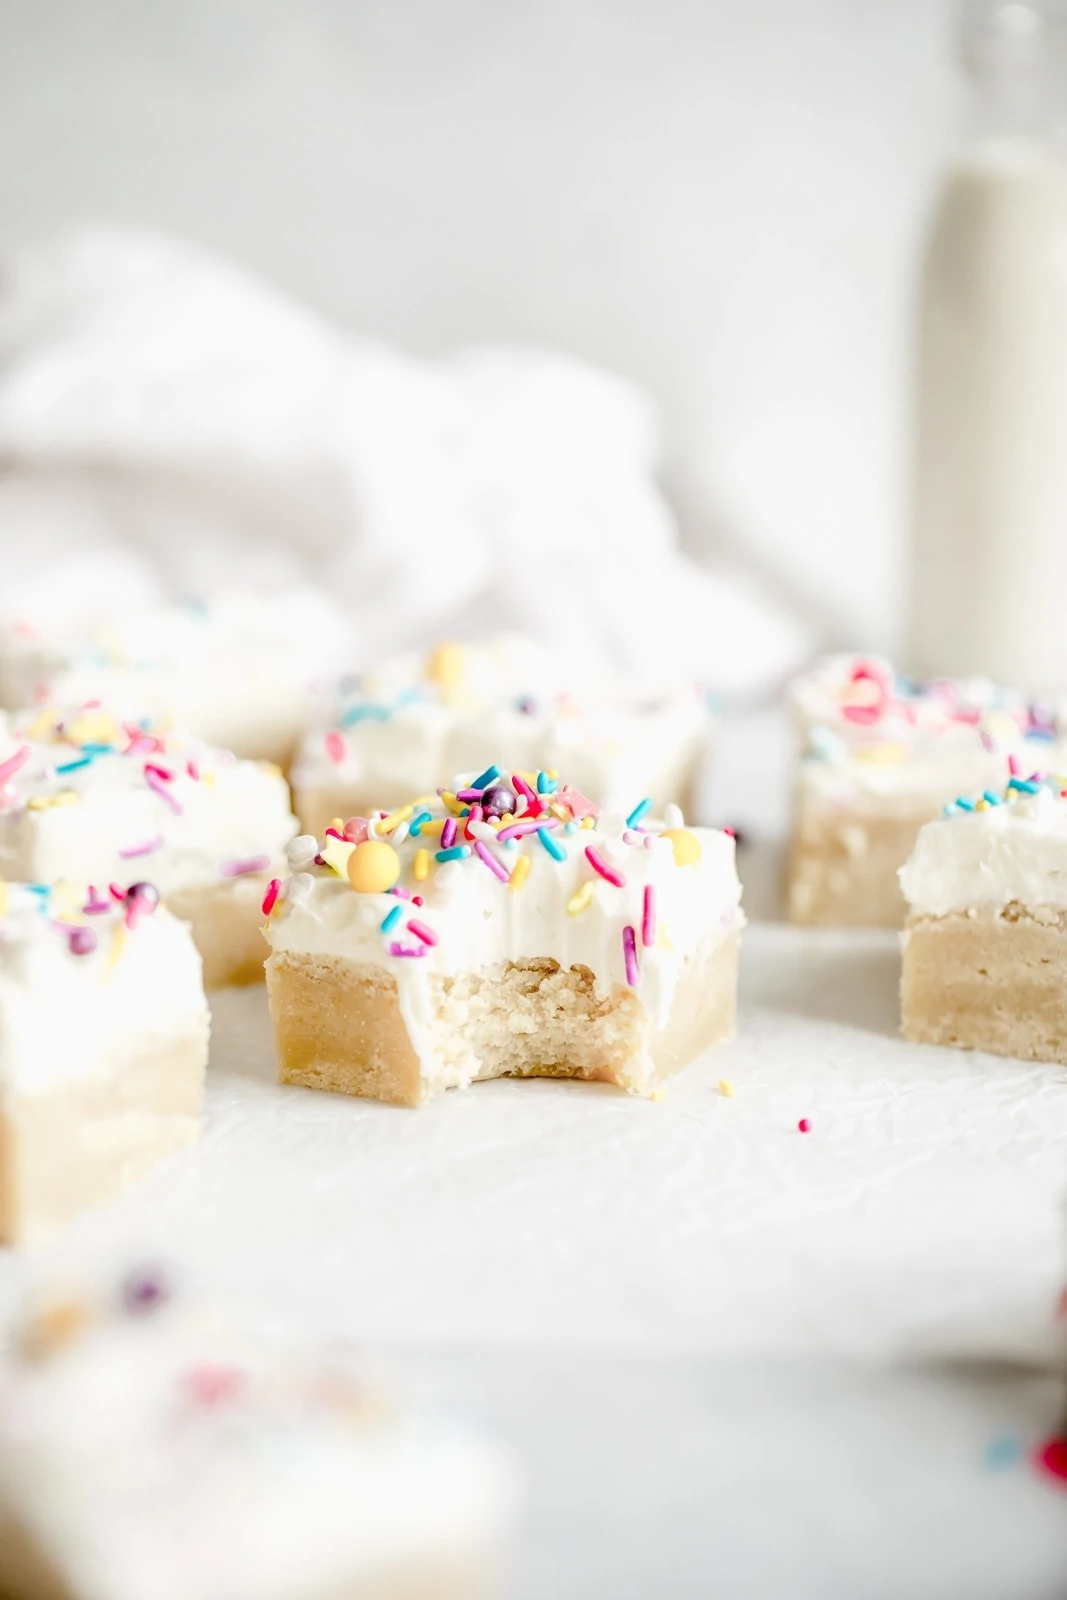 https://bromabakery.com/wp-content/uploads/2019/03/Sugar-Cookie-Bars-4.webp